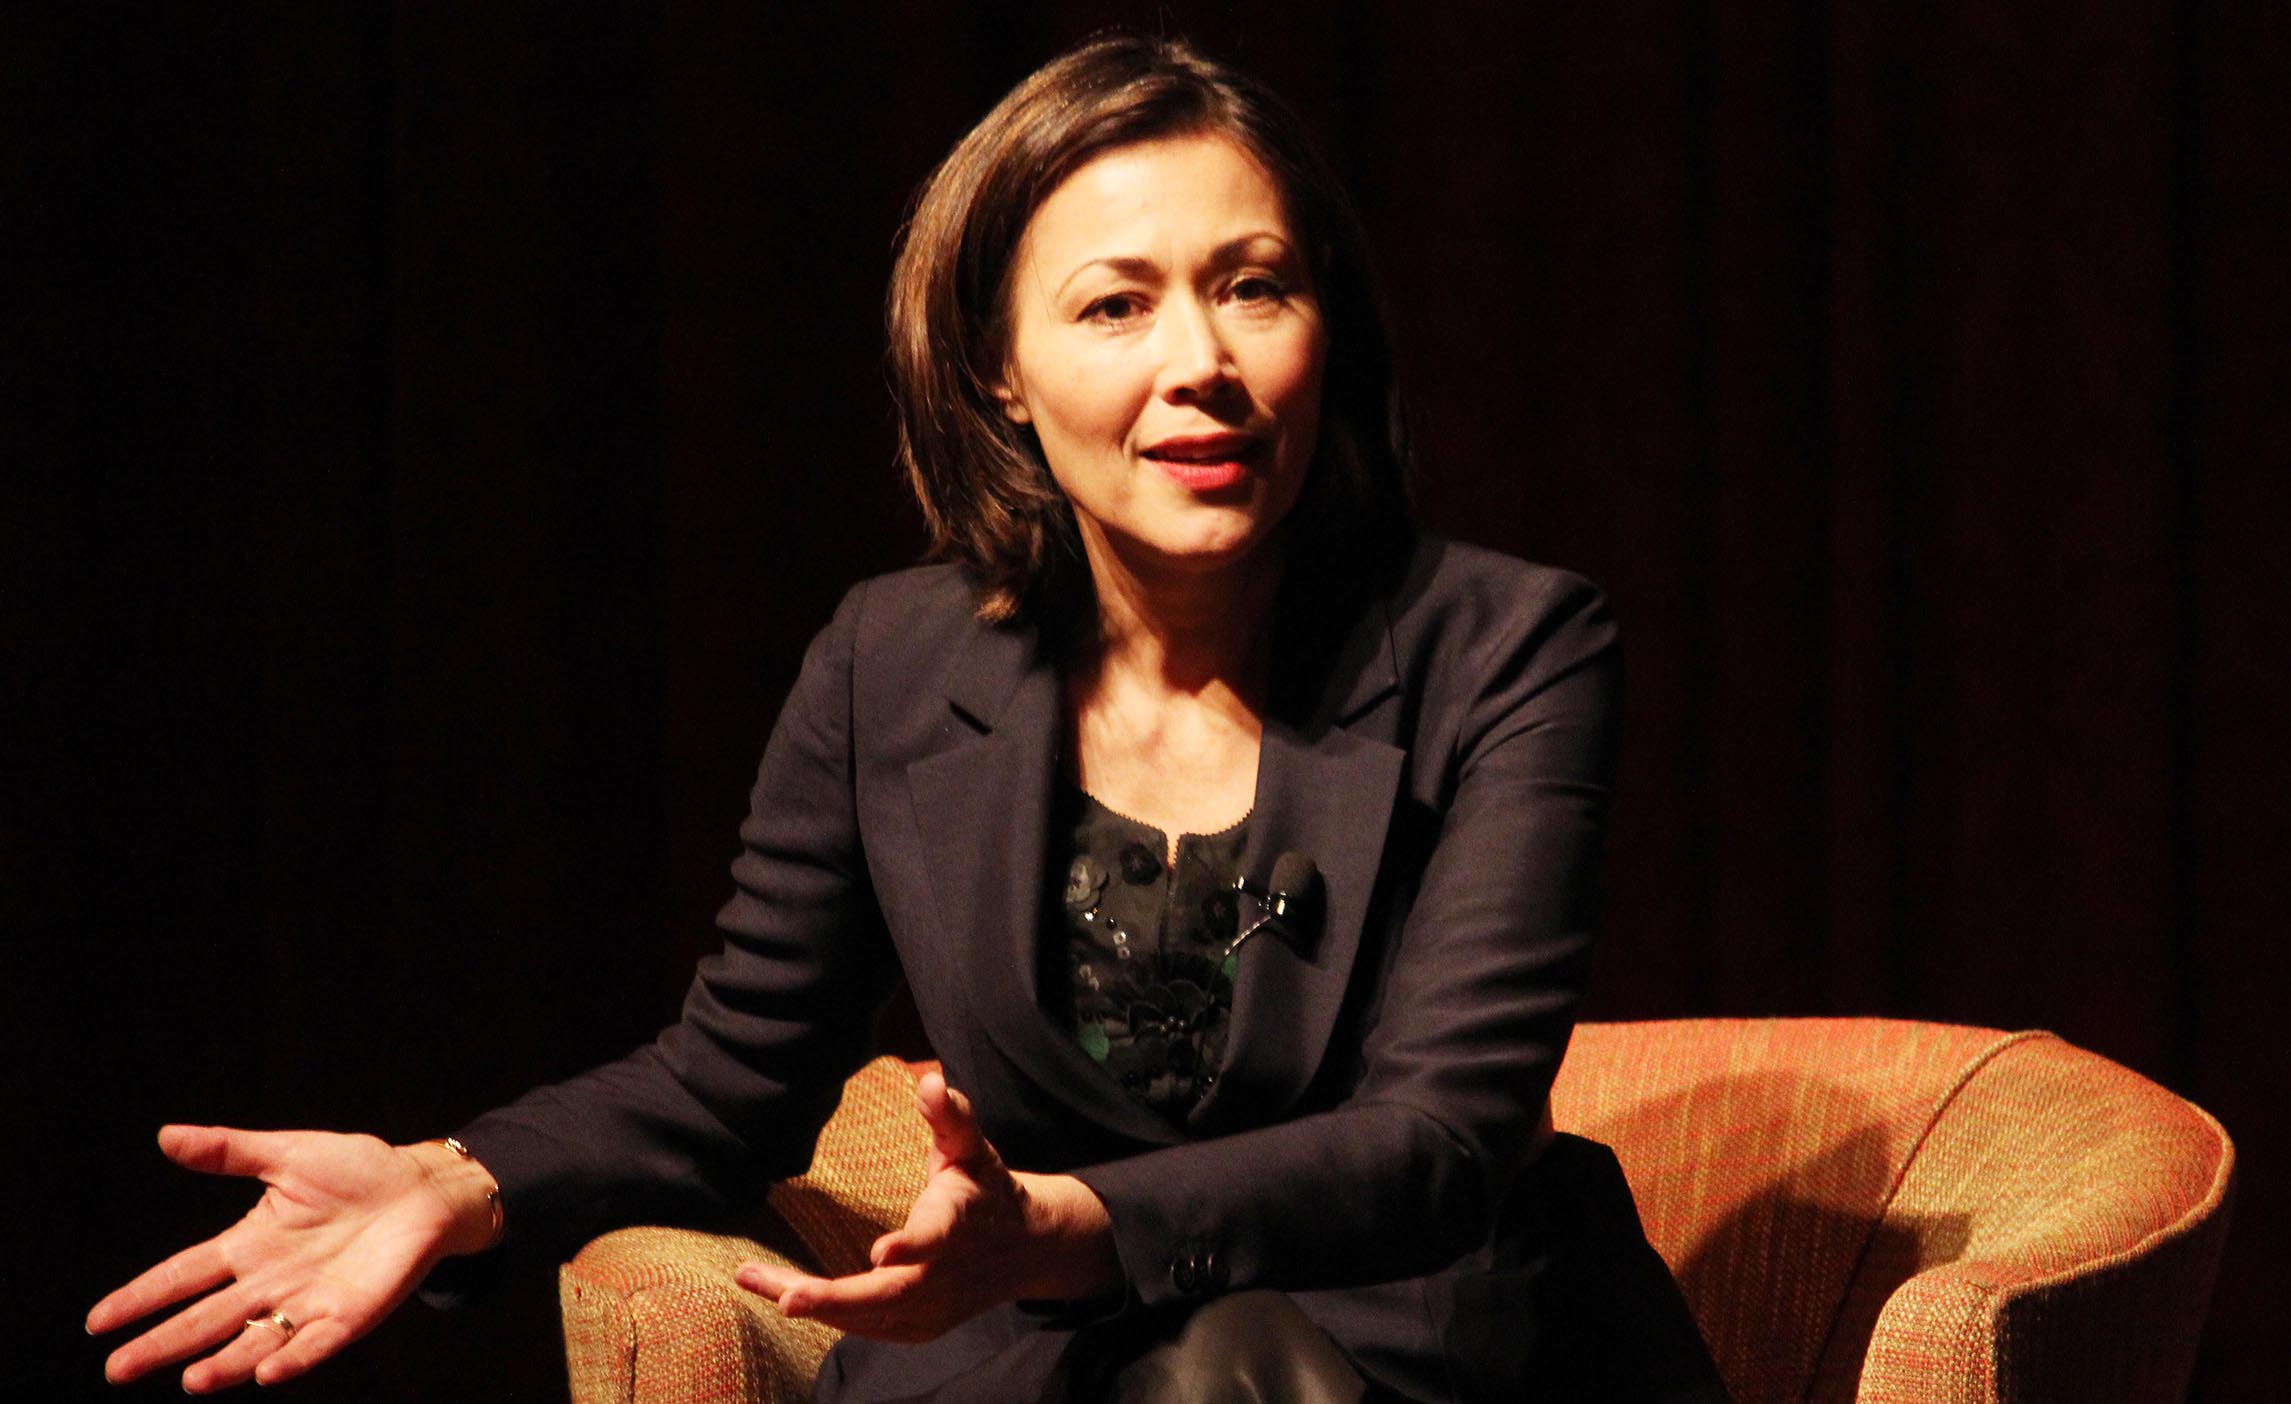 Ann Curry Photo by Lia Chang cropped